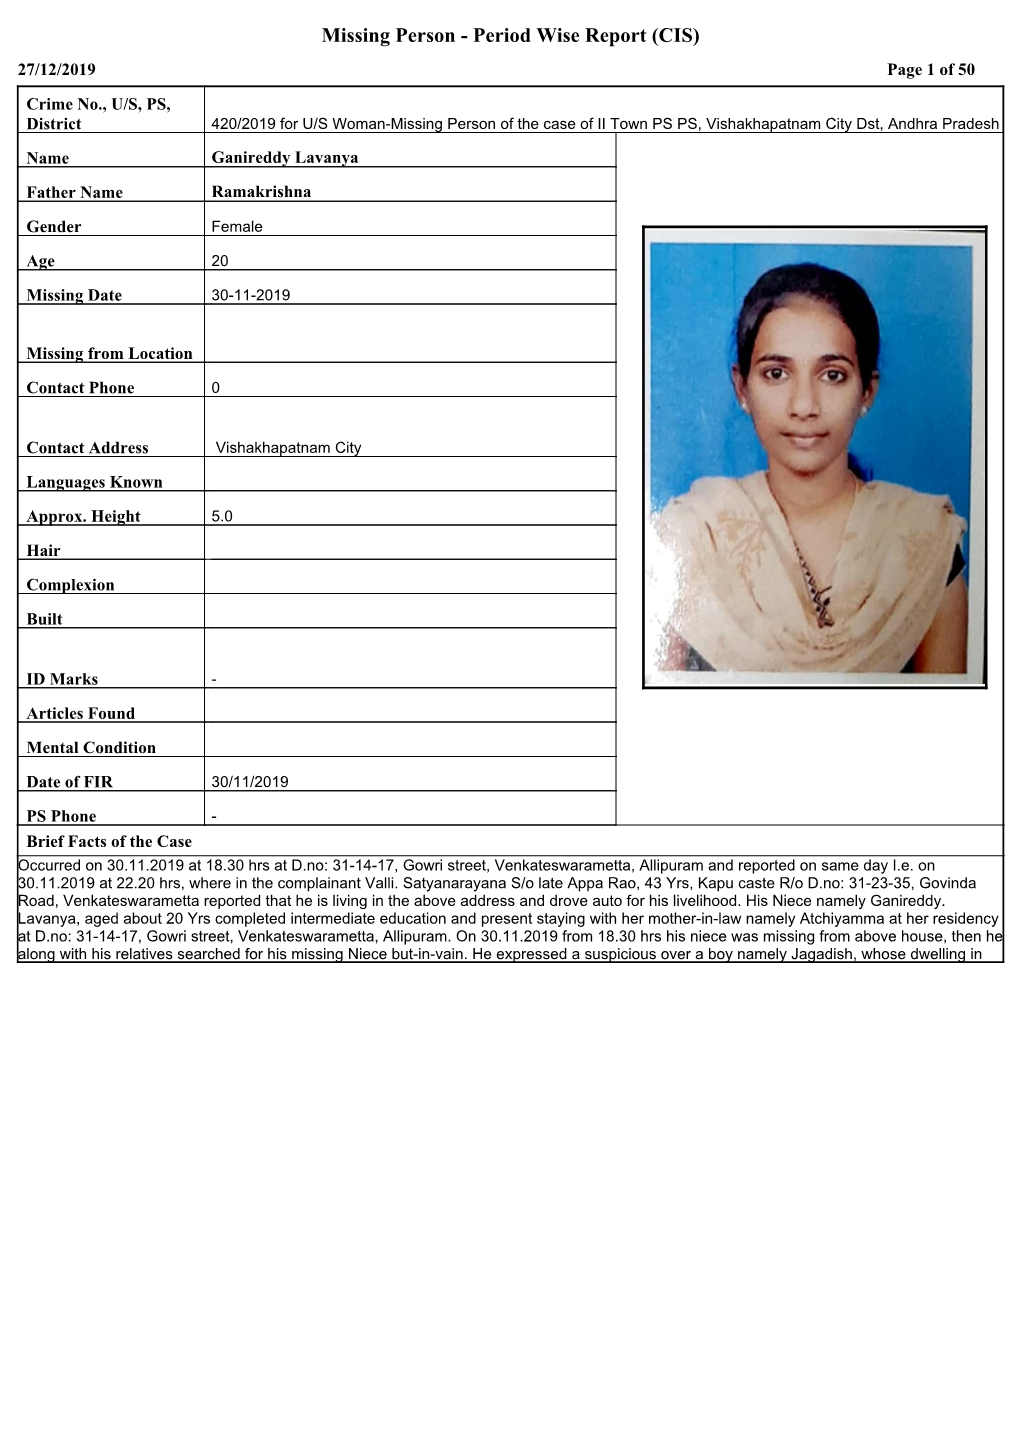 Missing Person - Period Wise Report (CIS) 27/12/2019 Page 1 of 50